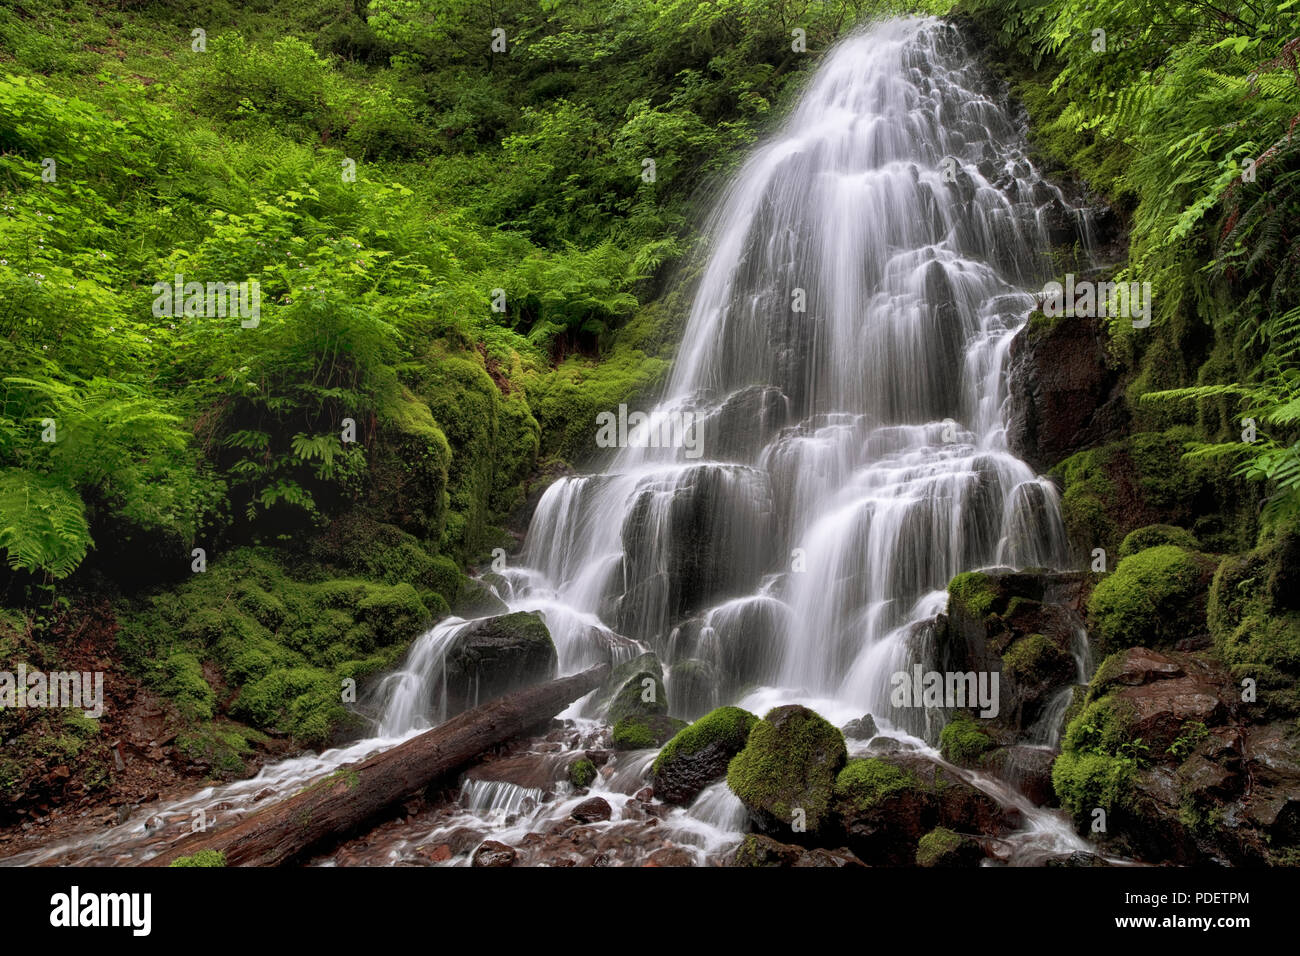 Wahkeena Creek pours 30 feet over Fairy Falls among the lush spring greenery in Oregon’s Columbia River Gorge National Scenic Area. Stock Photo